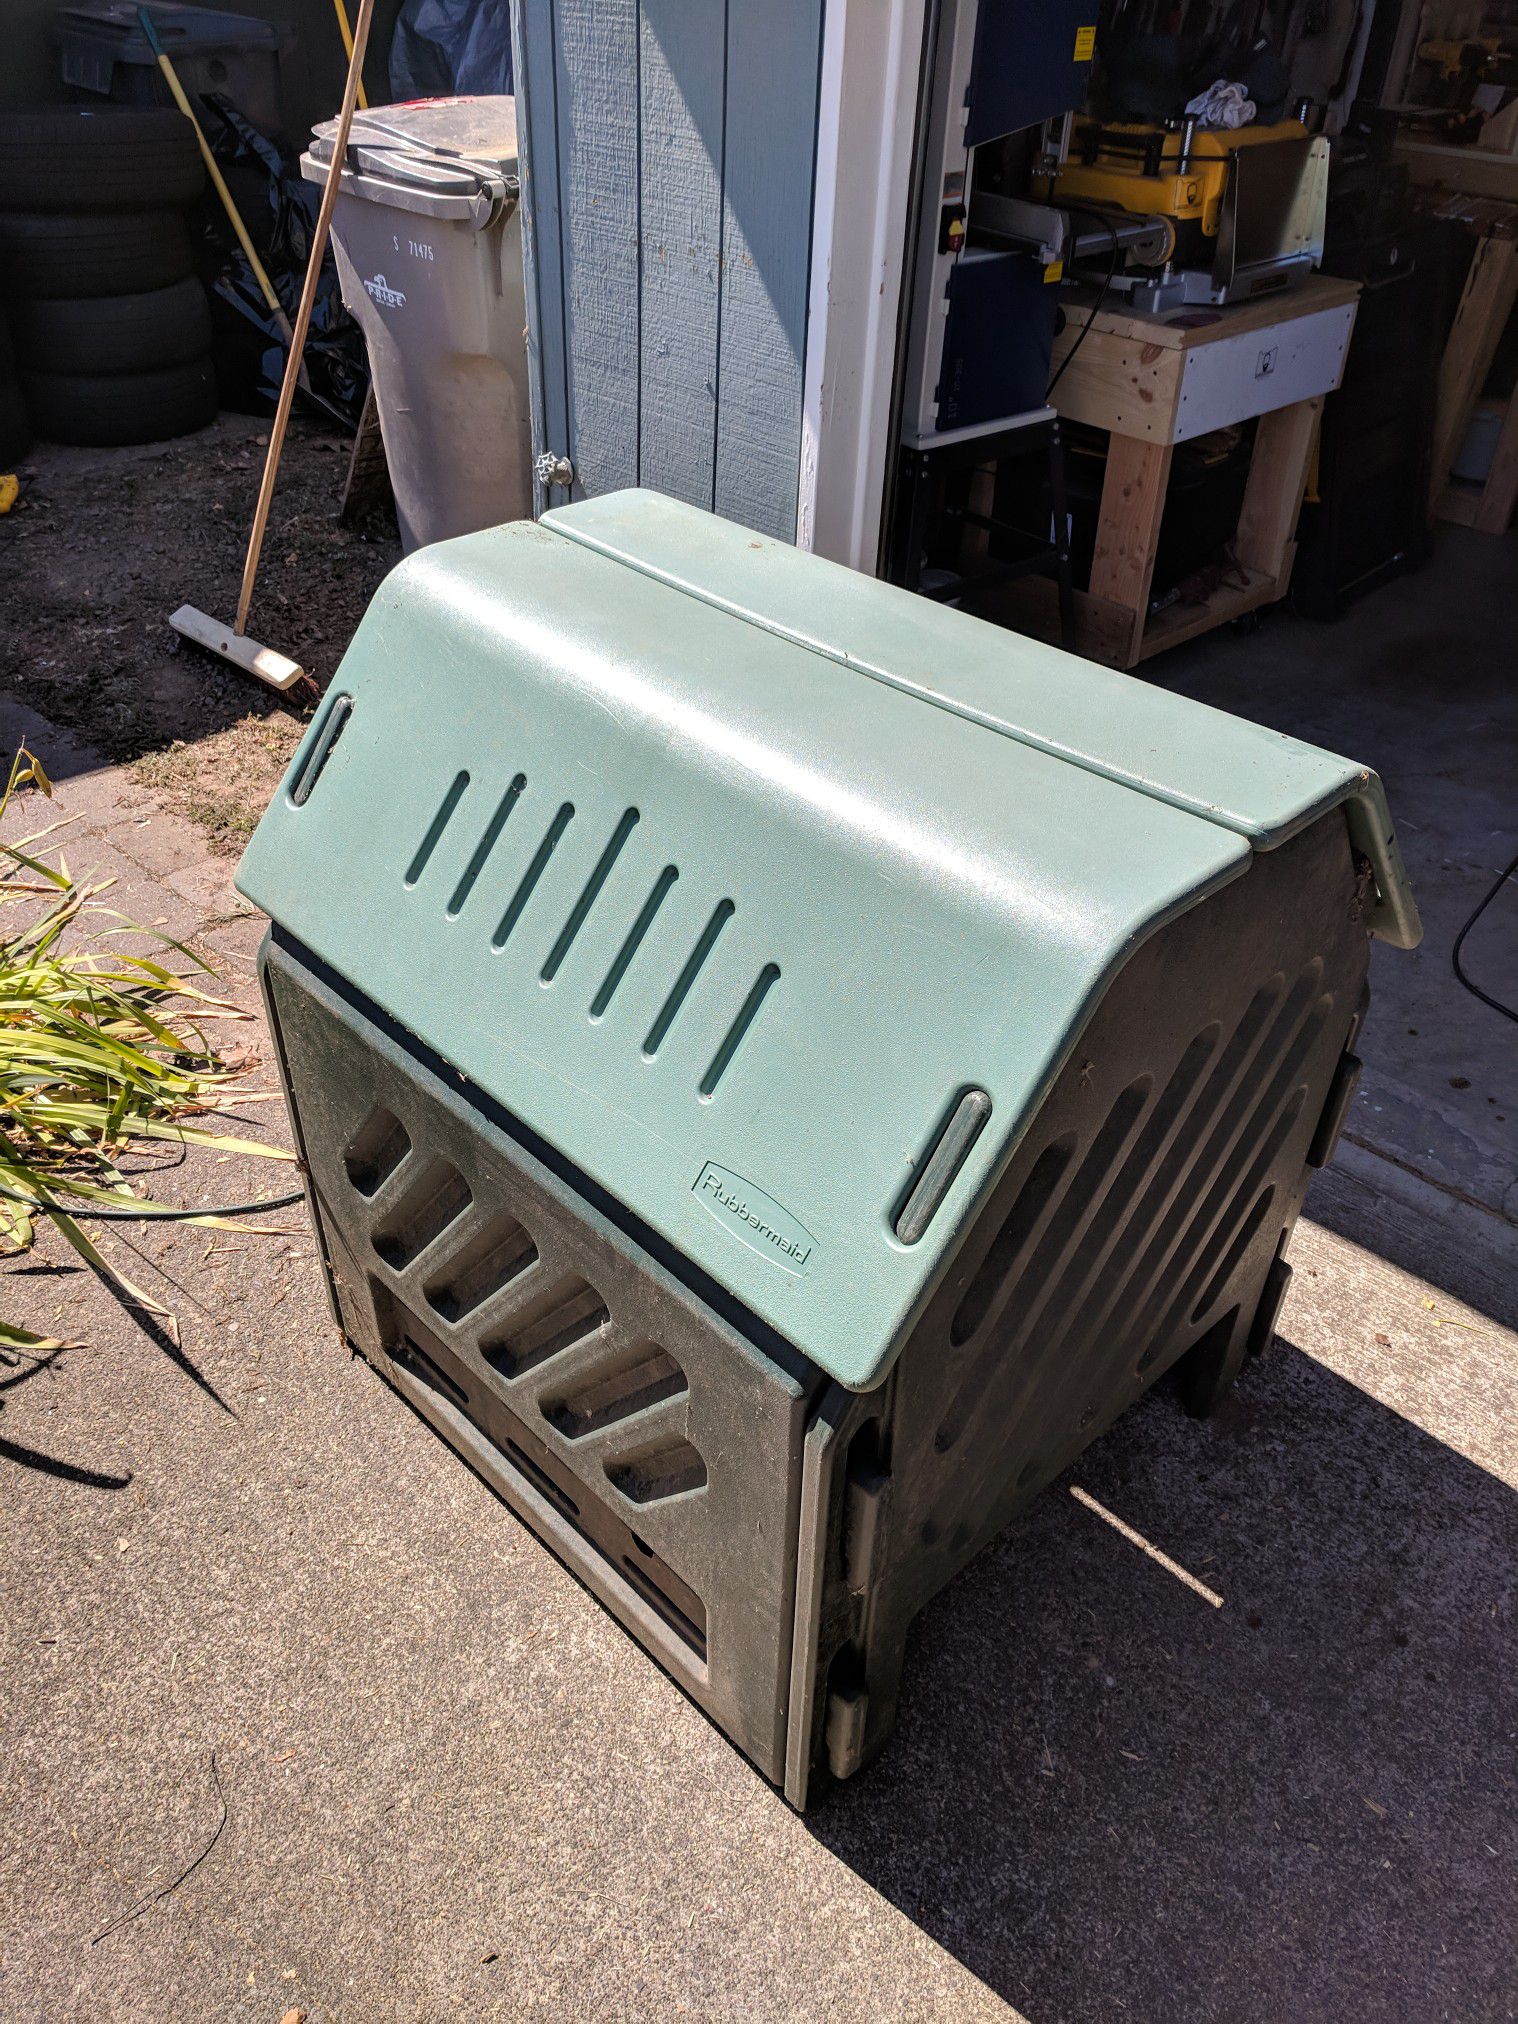 Rubbermaid outdoor garden storage box. 60 inches wide 26 inches deep and 27  inches high.$65 for Sale in North Palm Beach, FL - OfferUp